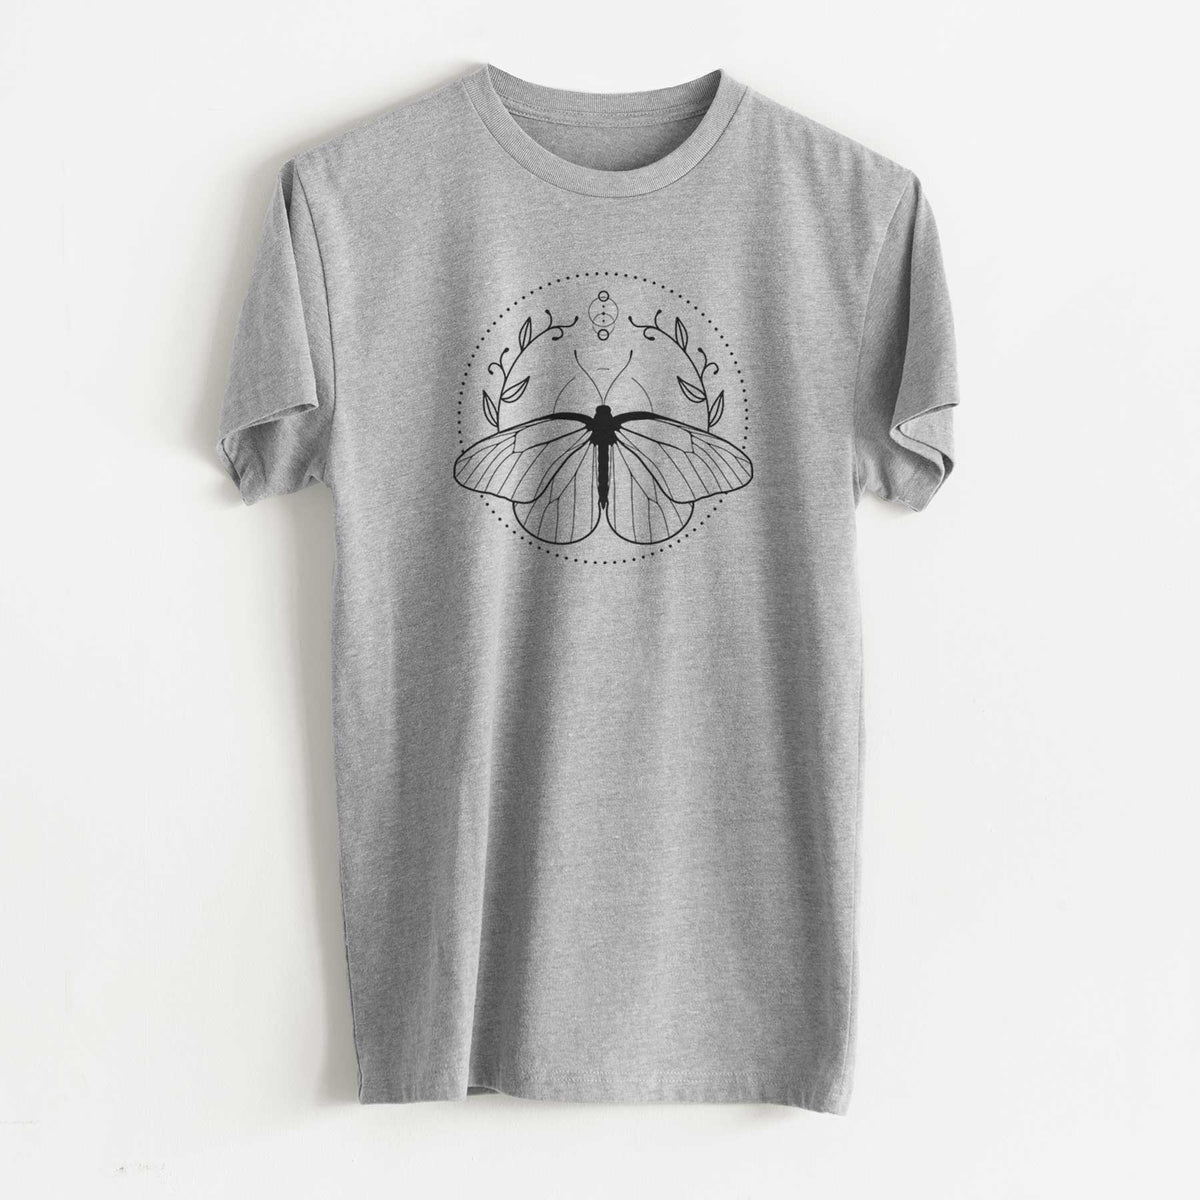 Aporia crataegi - Black Veined White Butterfly - Unisex Recycled Eco Tee  - CLOSEOUT - FINAL SALE